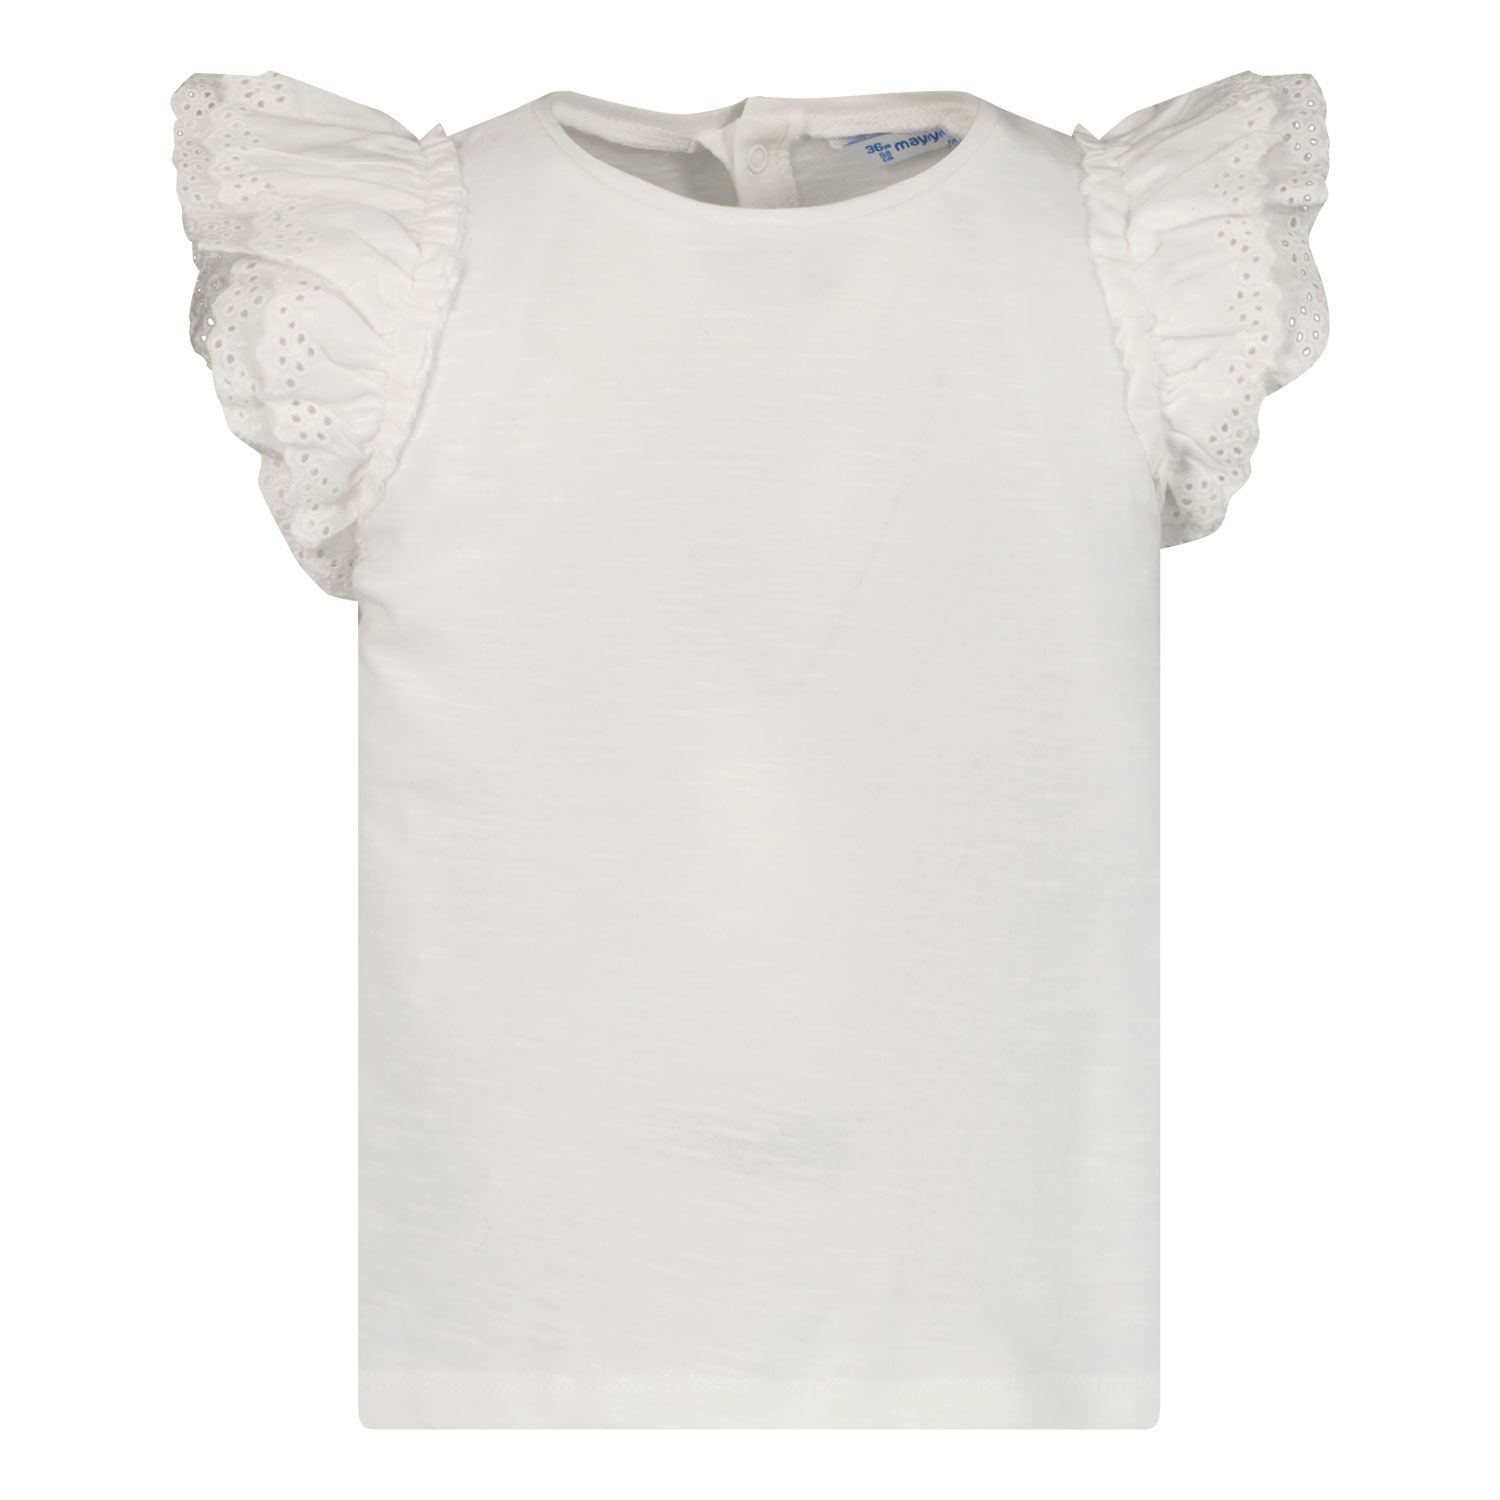 Picture of Mayoral 1027 baby shirt white